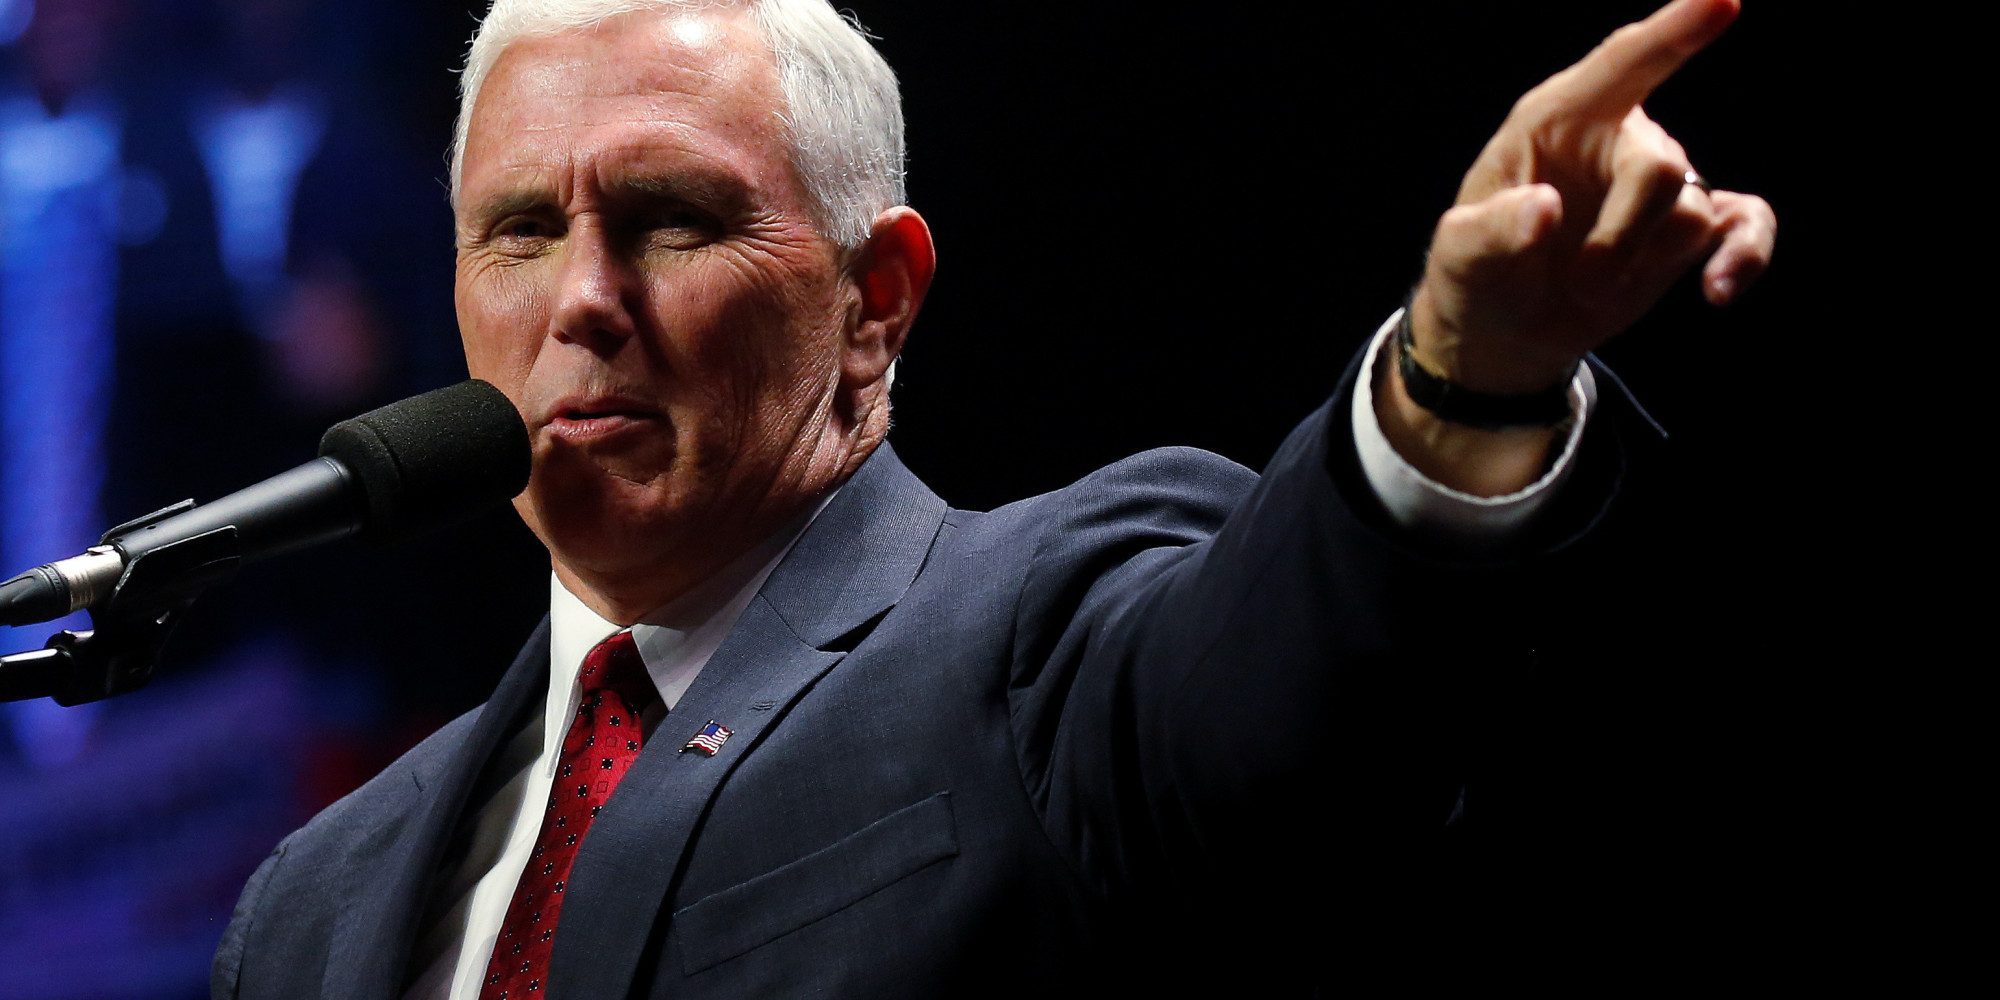 Republican vice presidential nominee Mike Pence attends a campaign rally in Manchester